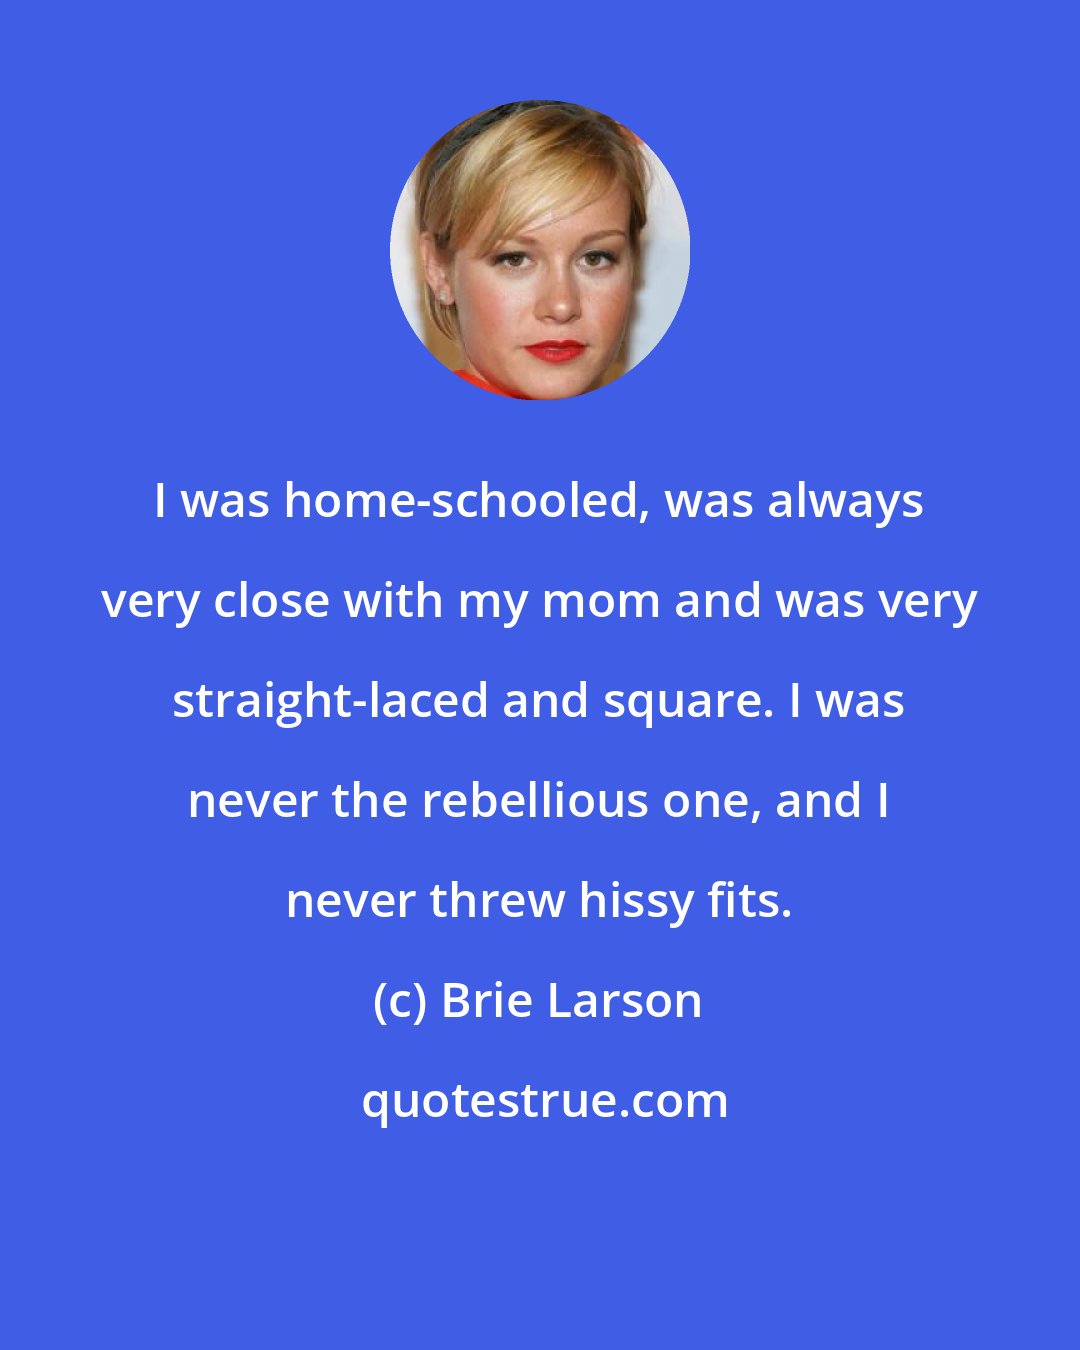 Brie Larson: I was home-schooled, was always very close with my mom and was very straight-laced and square. I was never the rebellious one, and I never threw hissy fits.